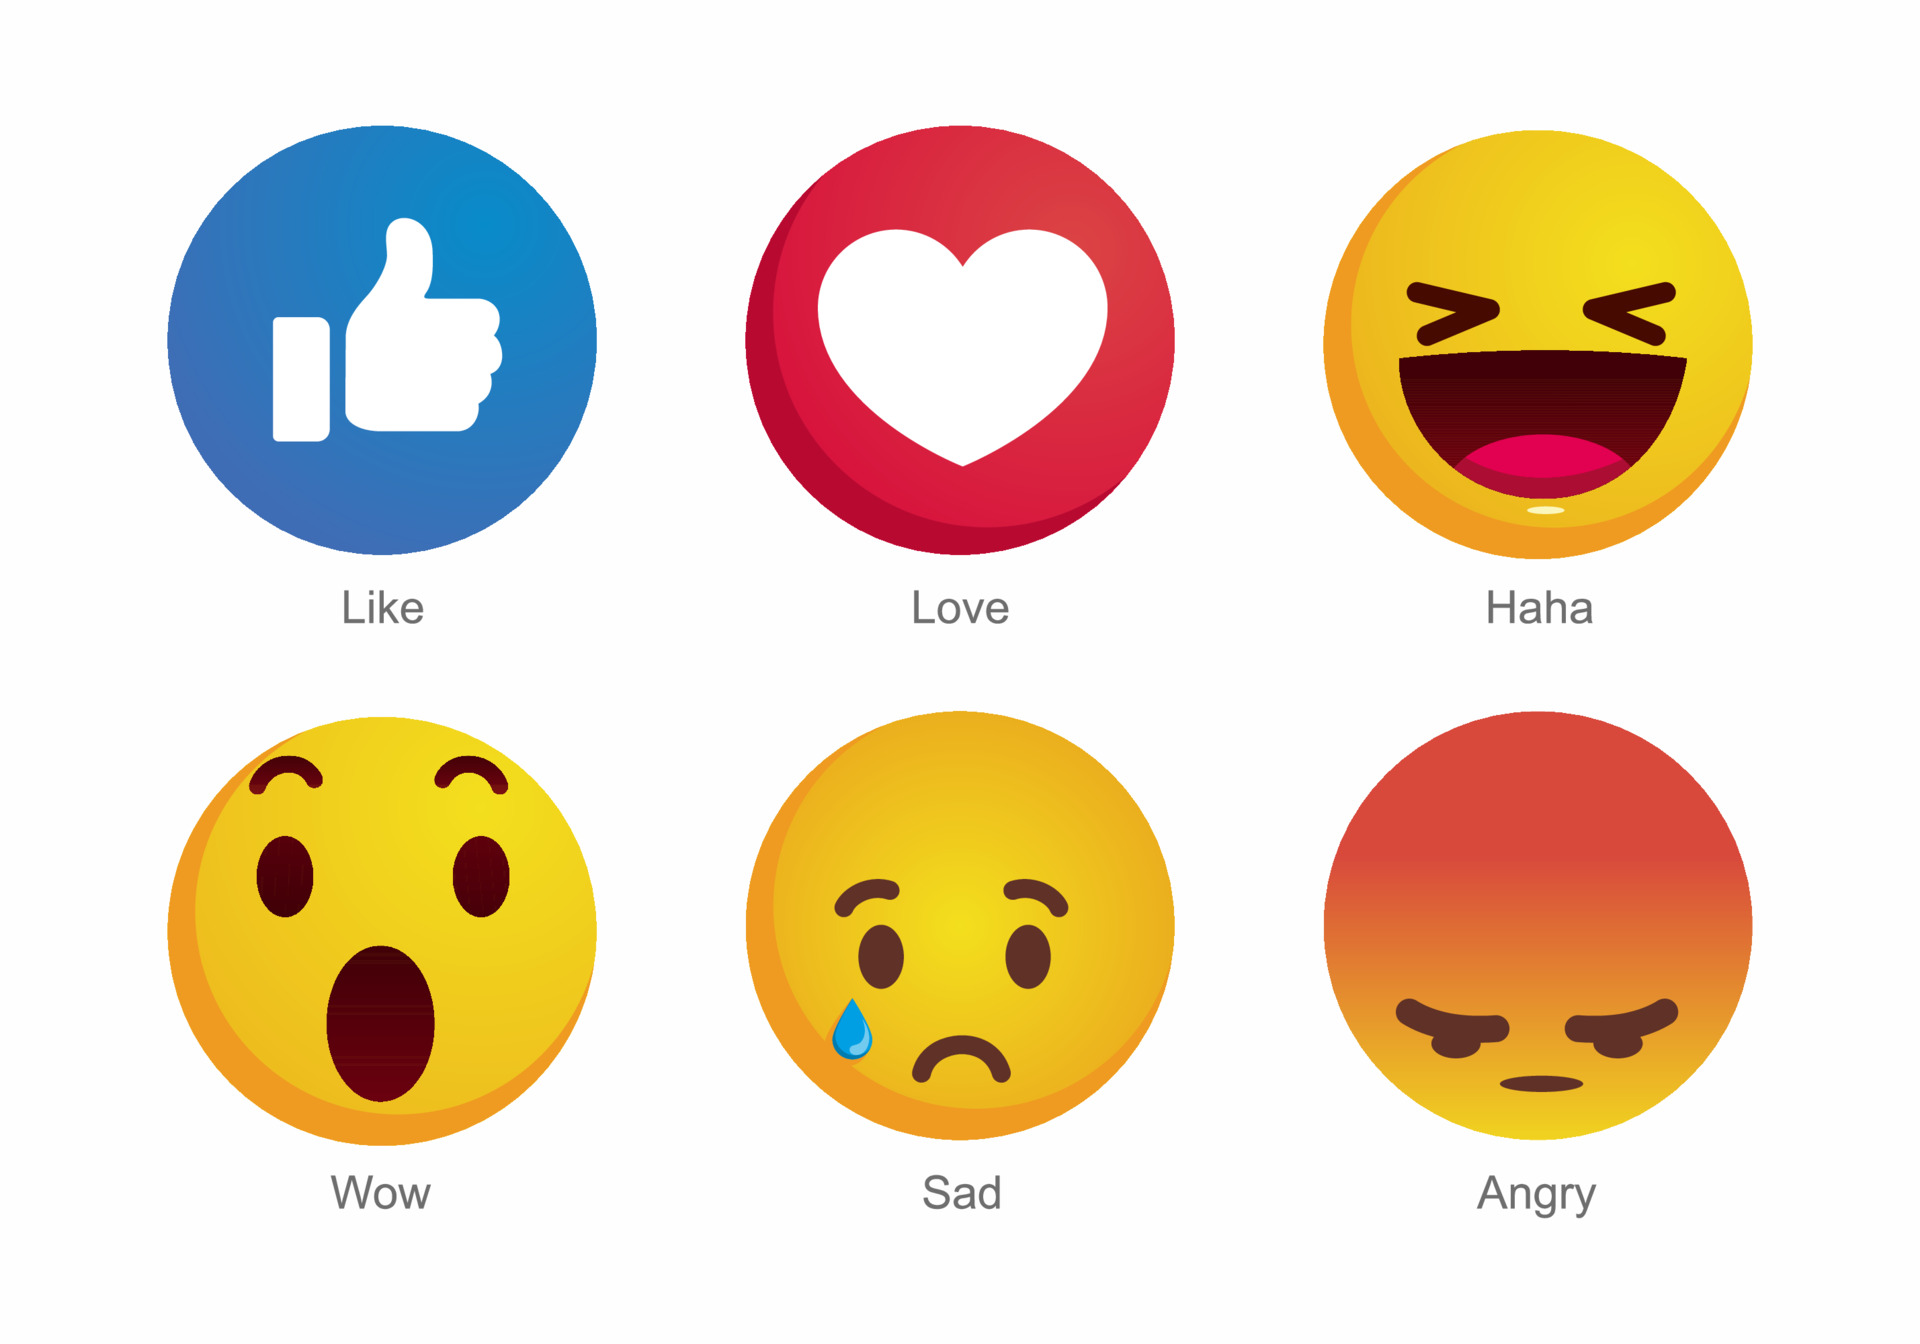 A set of emojis that display a wide variety of emotions.